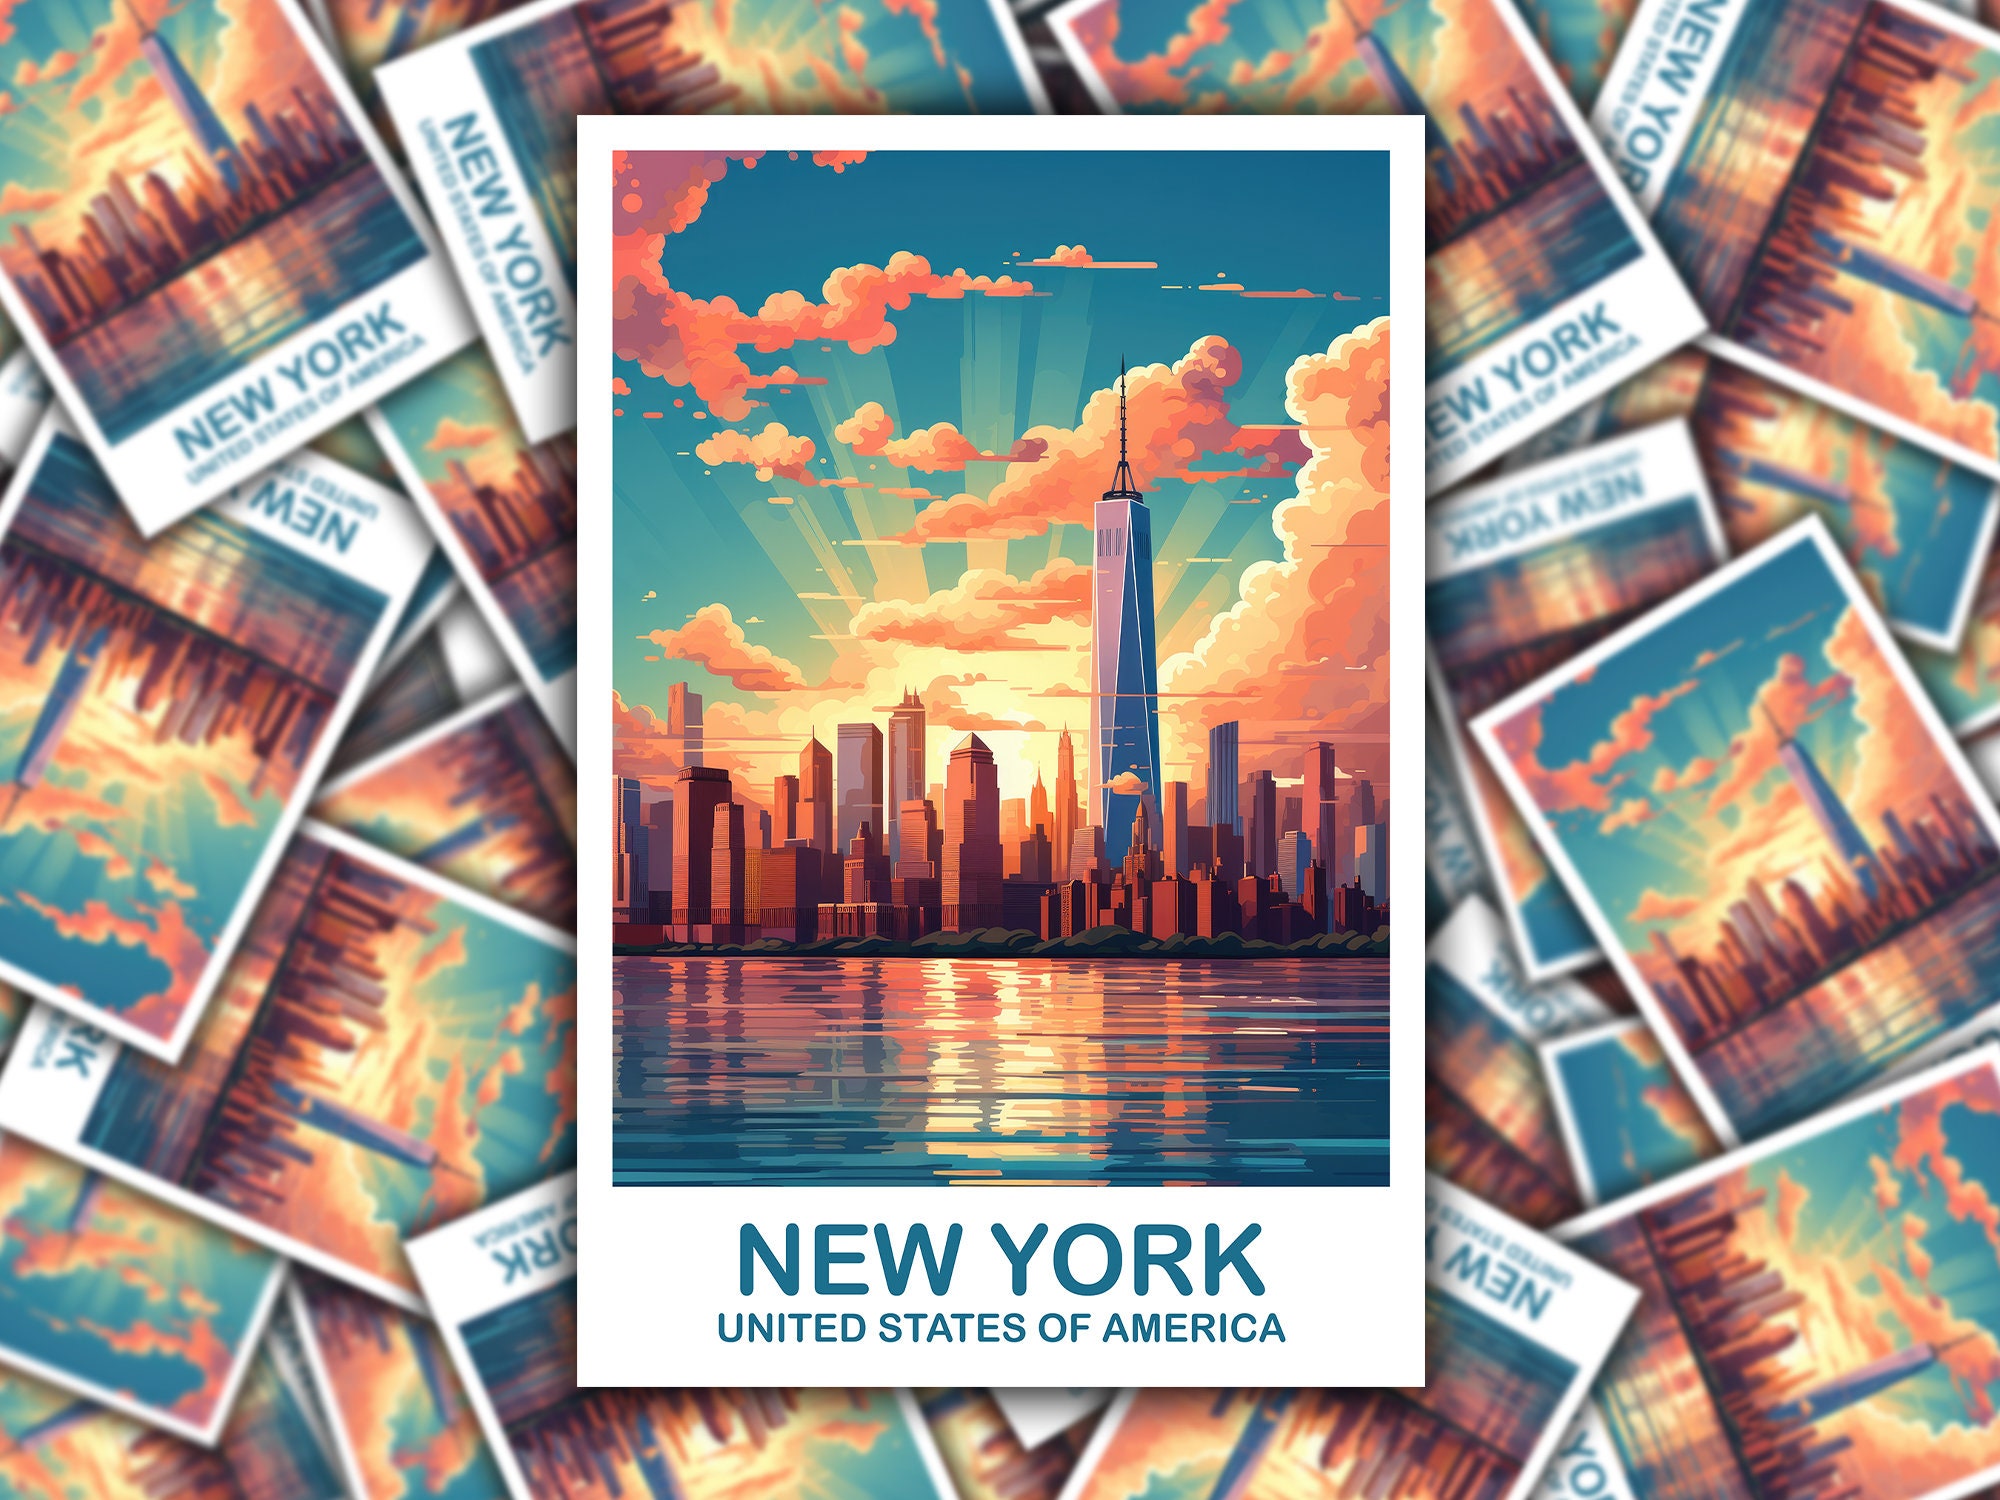 New York Die Cut Sticker Pack, Removable Stickers, NYC Laptop Decals,  Travel Stickers Set of 20 